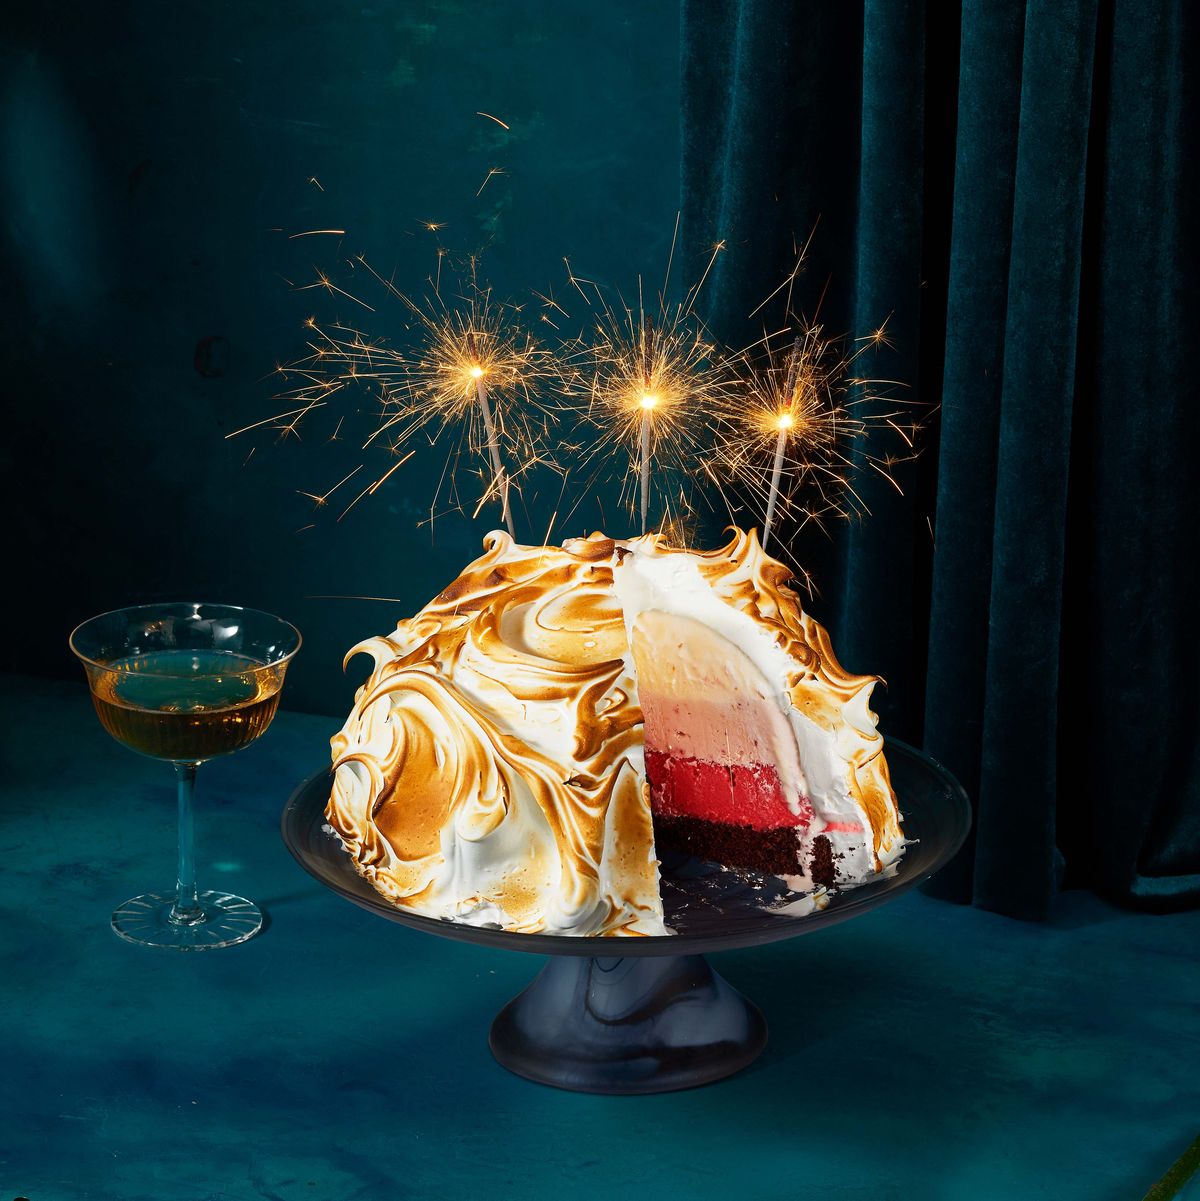 ombré baked alaska cake with ice cream in the center and sparklers on top